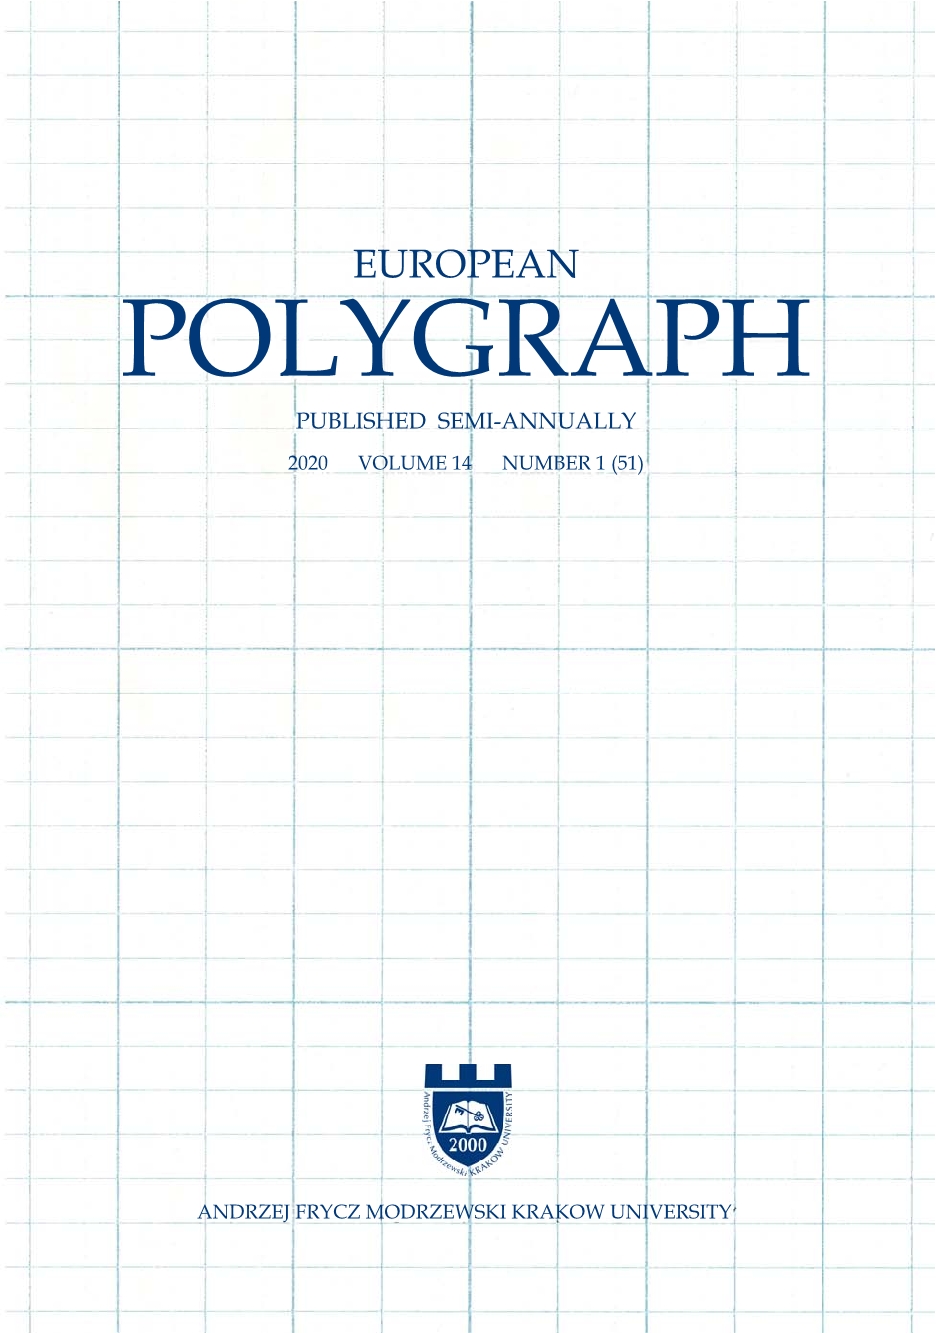 A Hundred Years of Polygraphy: Some Primary Changes and Related Issues